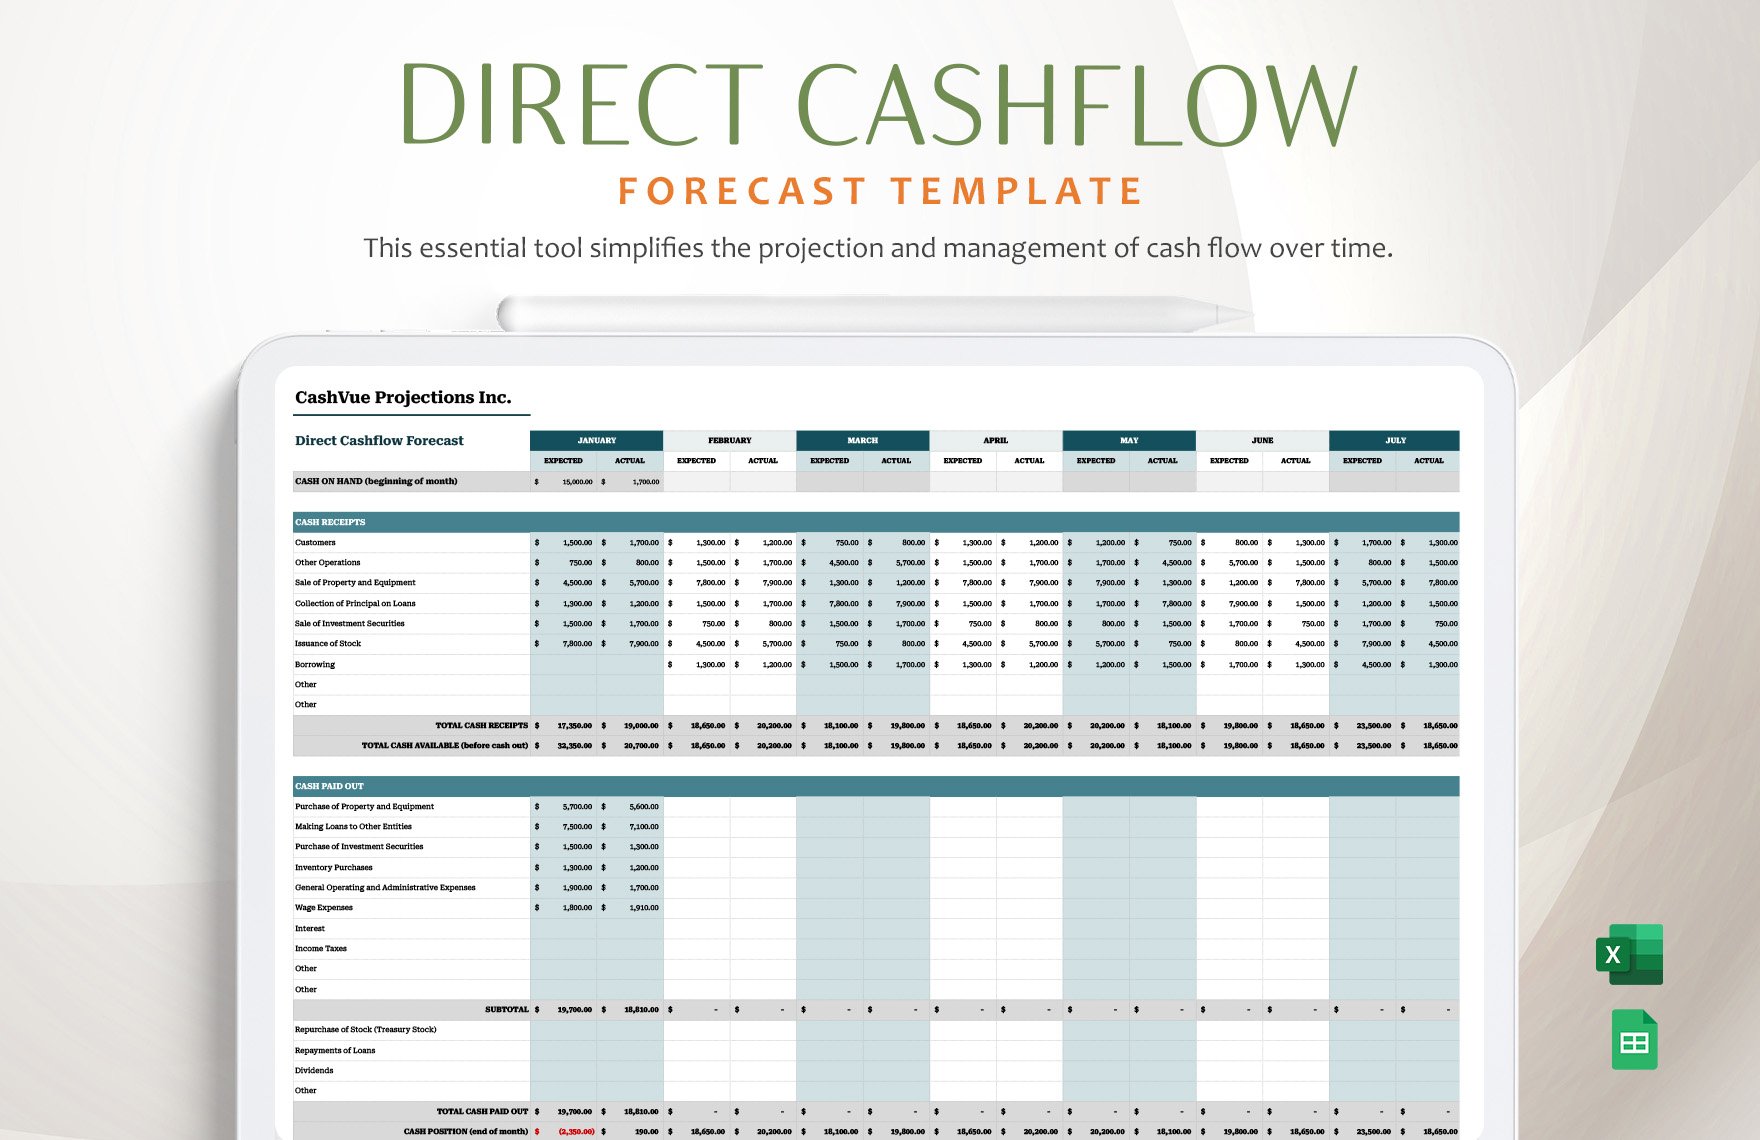 Direct Cashflow Forecast Template in Excel, Google Sheets